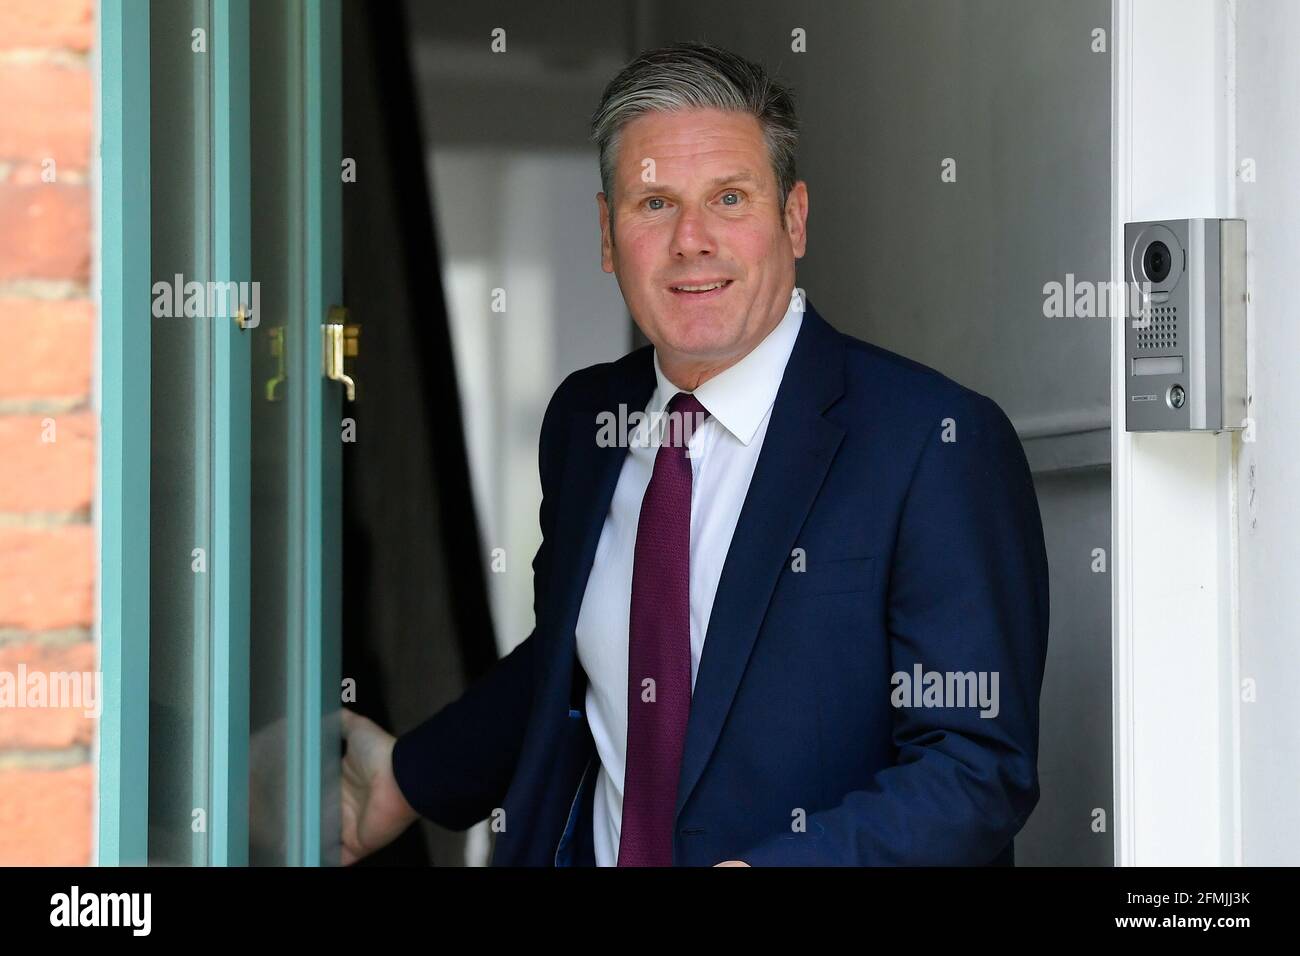 Britain’s Labour Party leader, Keir Starmer leaves his home in London, Britain May 10, 2021. REUTERS/Toby Melville Stock Photo